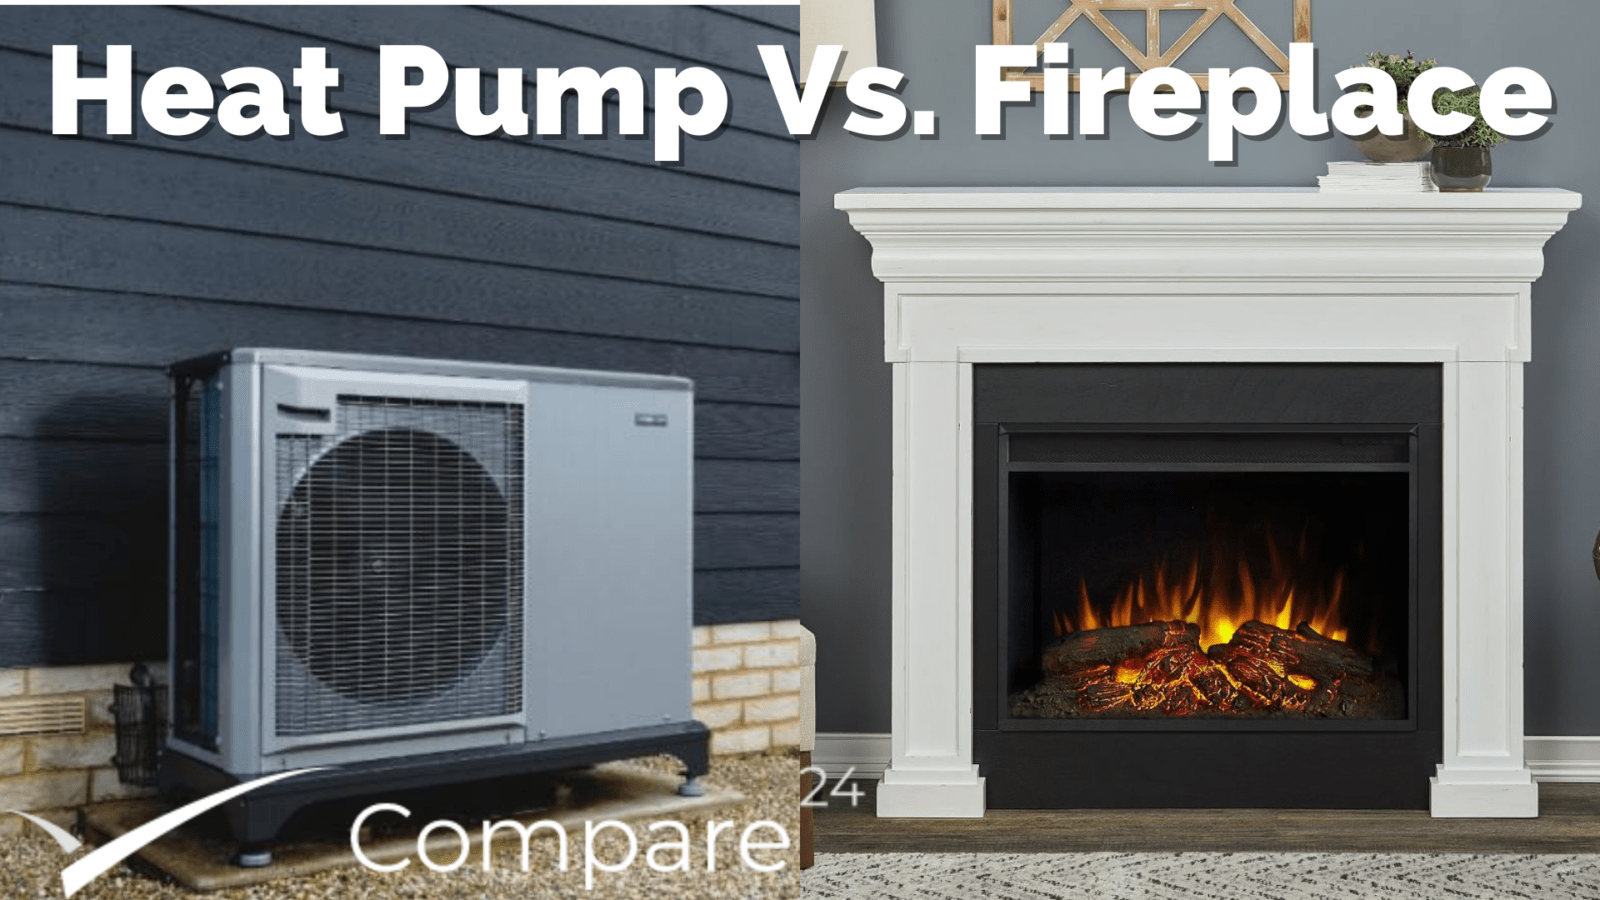 Heat Pump vs Fireplace: Which One Is Better?